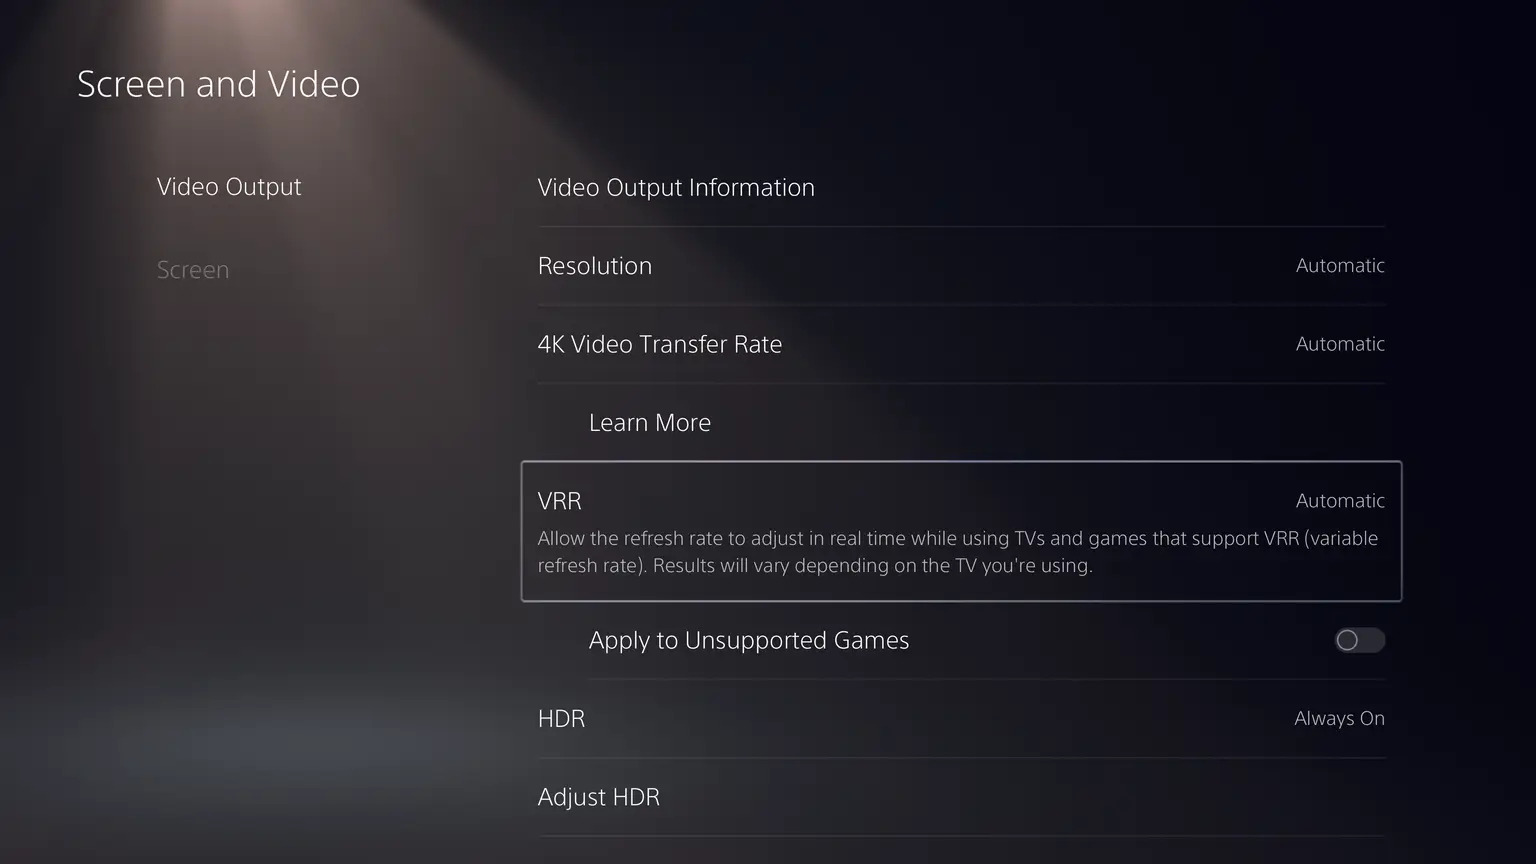 PS5 VRR support is rolling out globally this week.